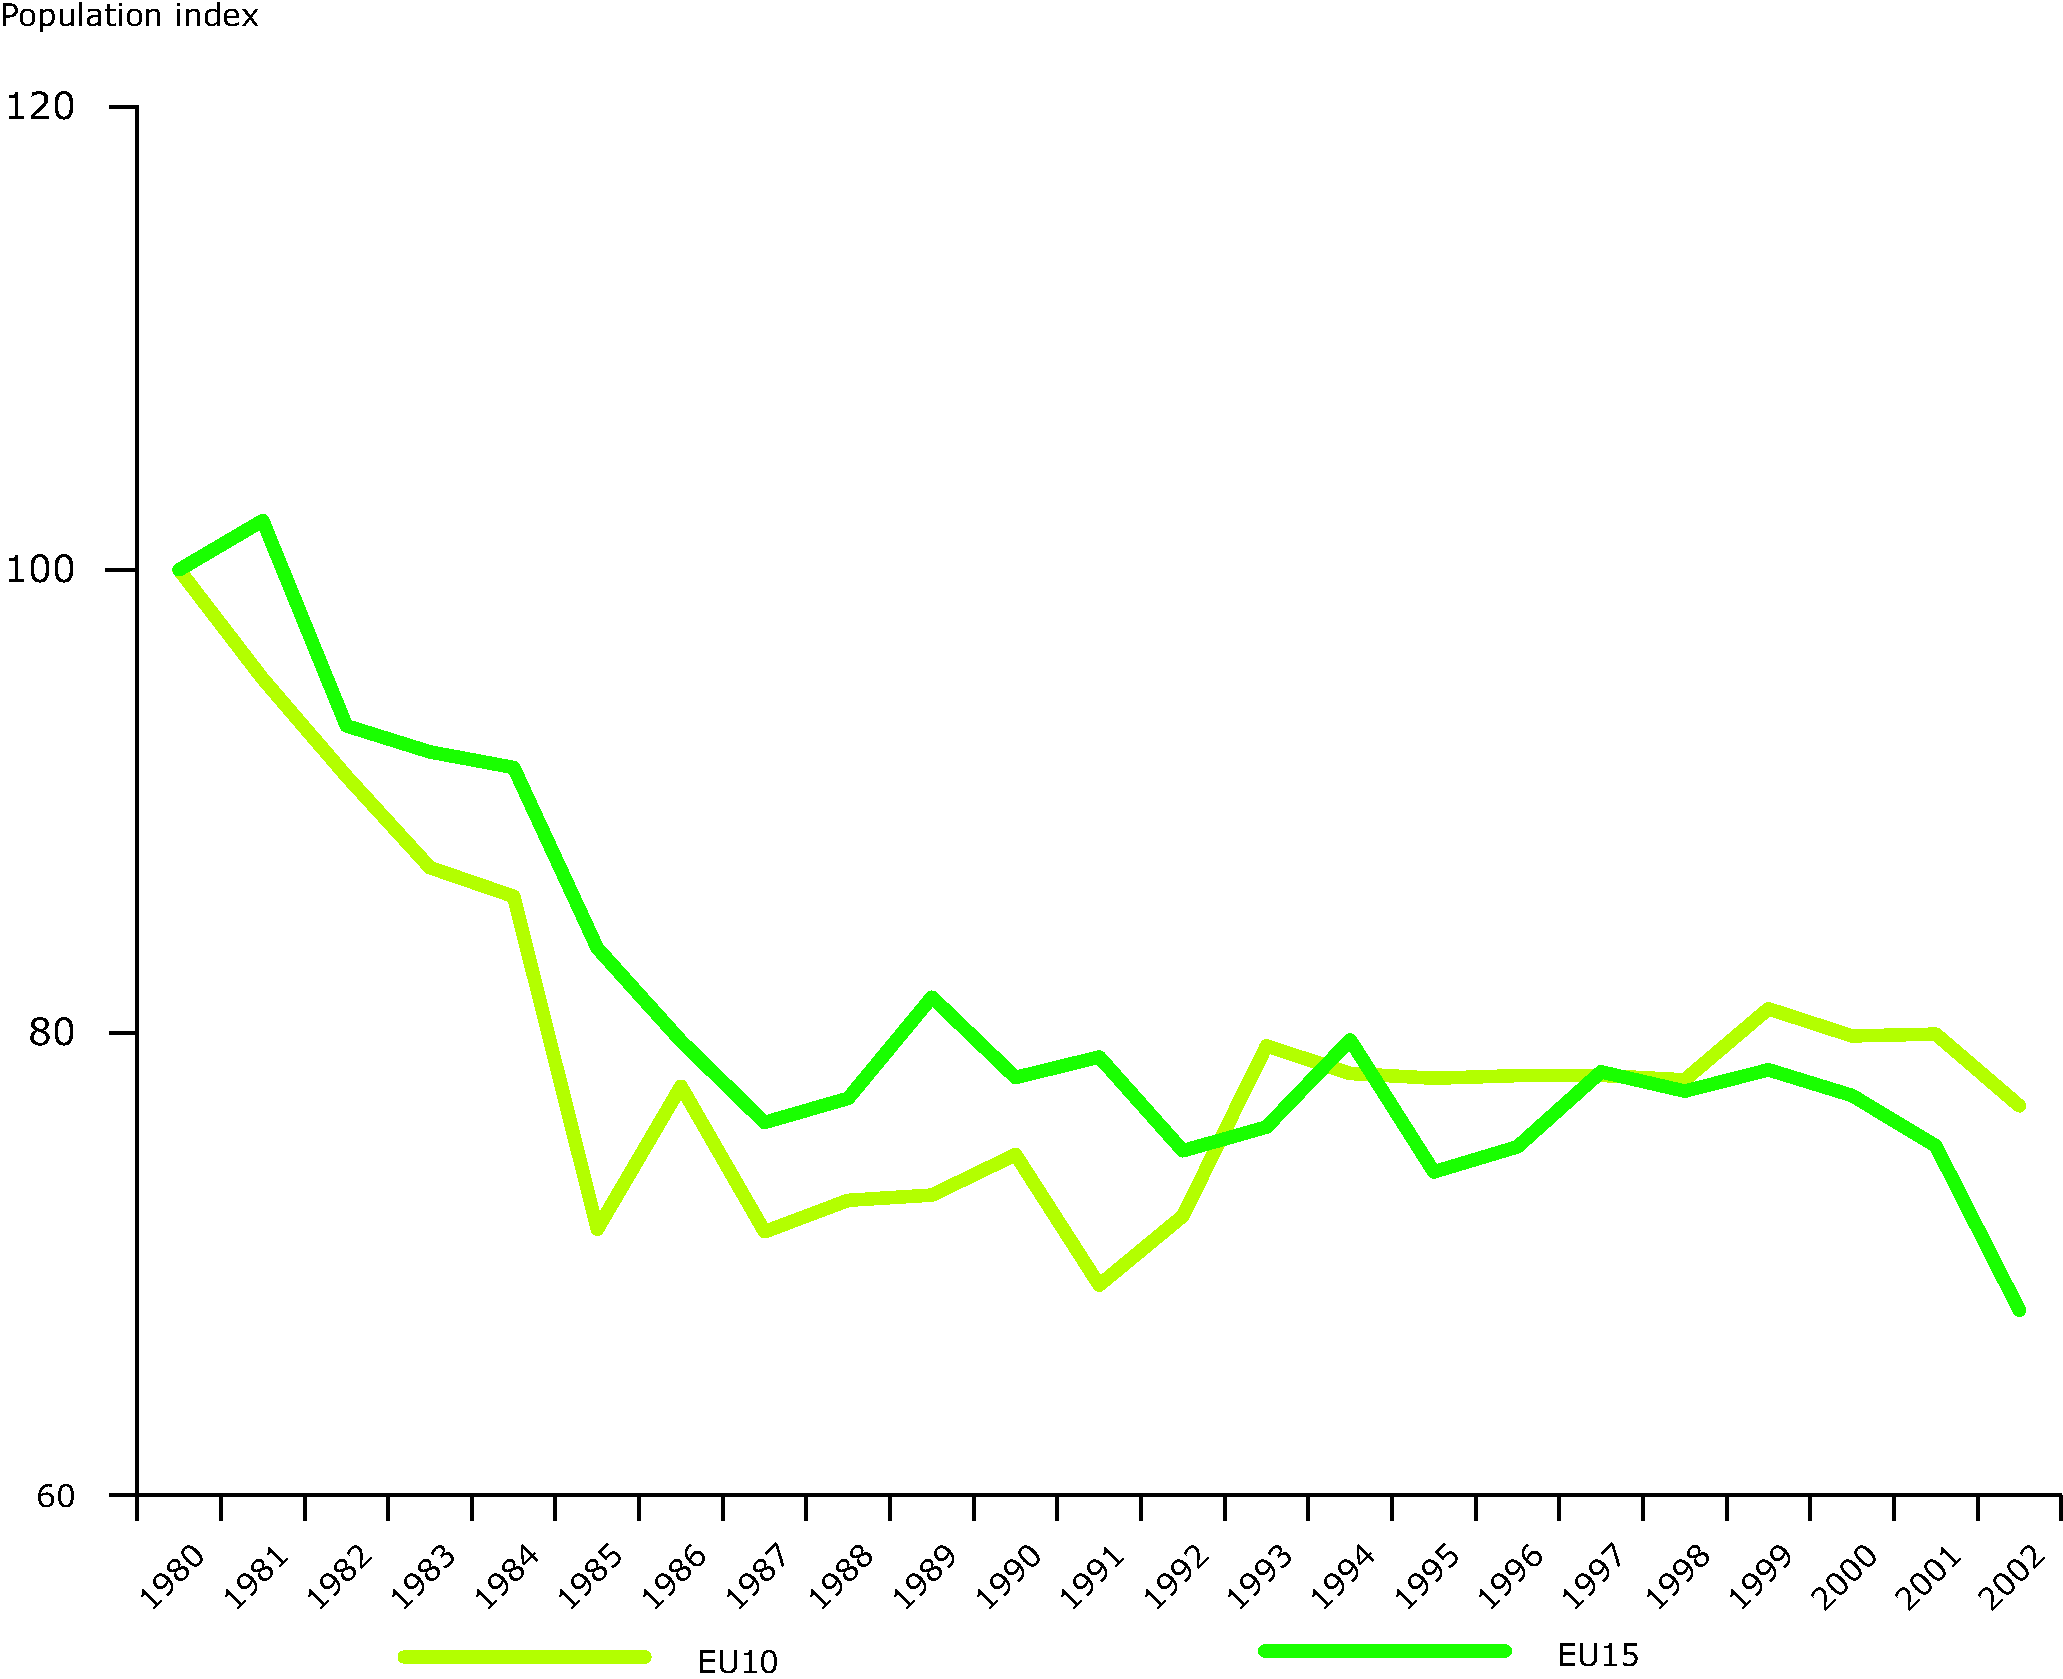 Common farmland bird trend from 1980 and 2002 in EU15 Member States and EU10 Member States